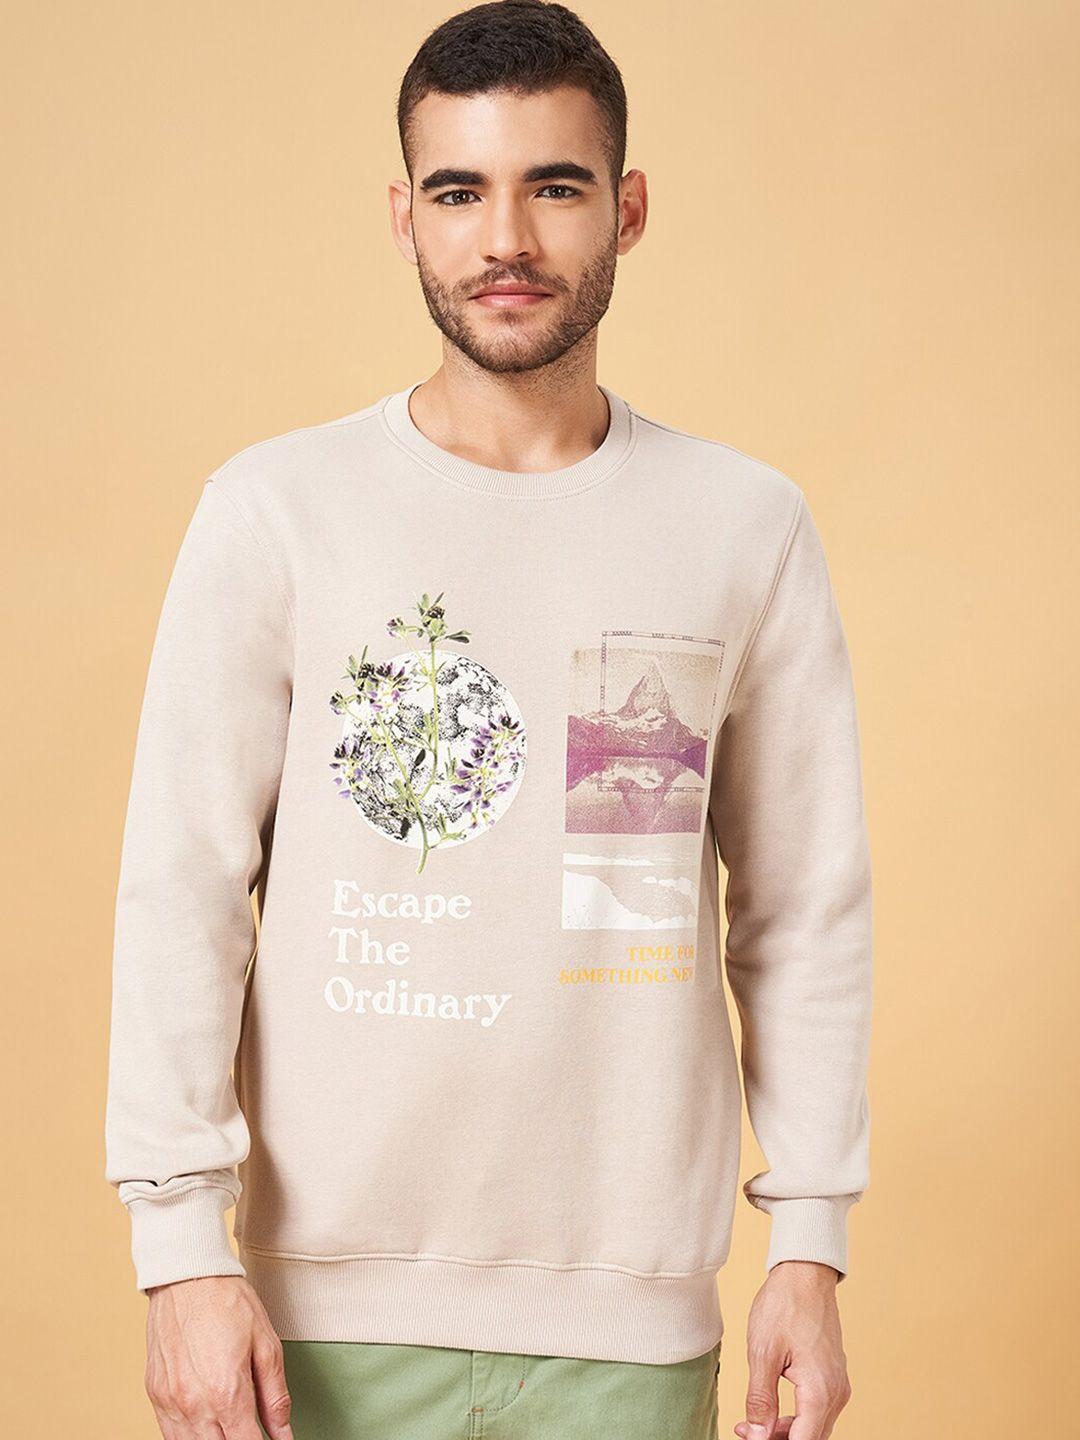 urban ranger by pantaloons graphic printed cotton pullover